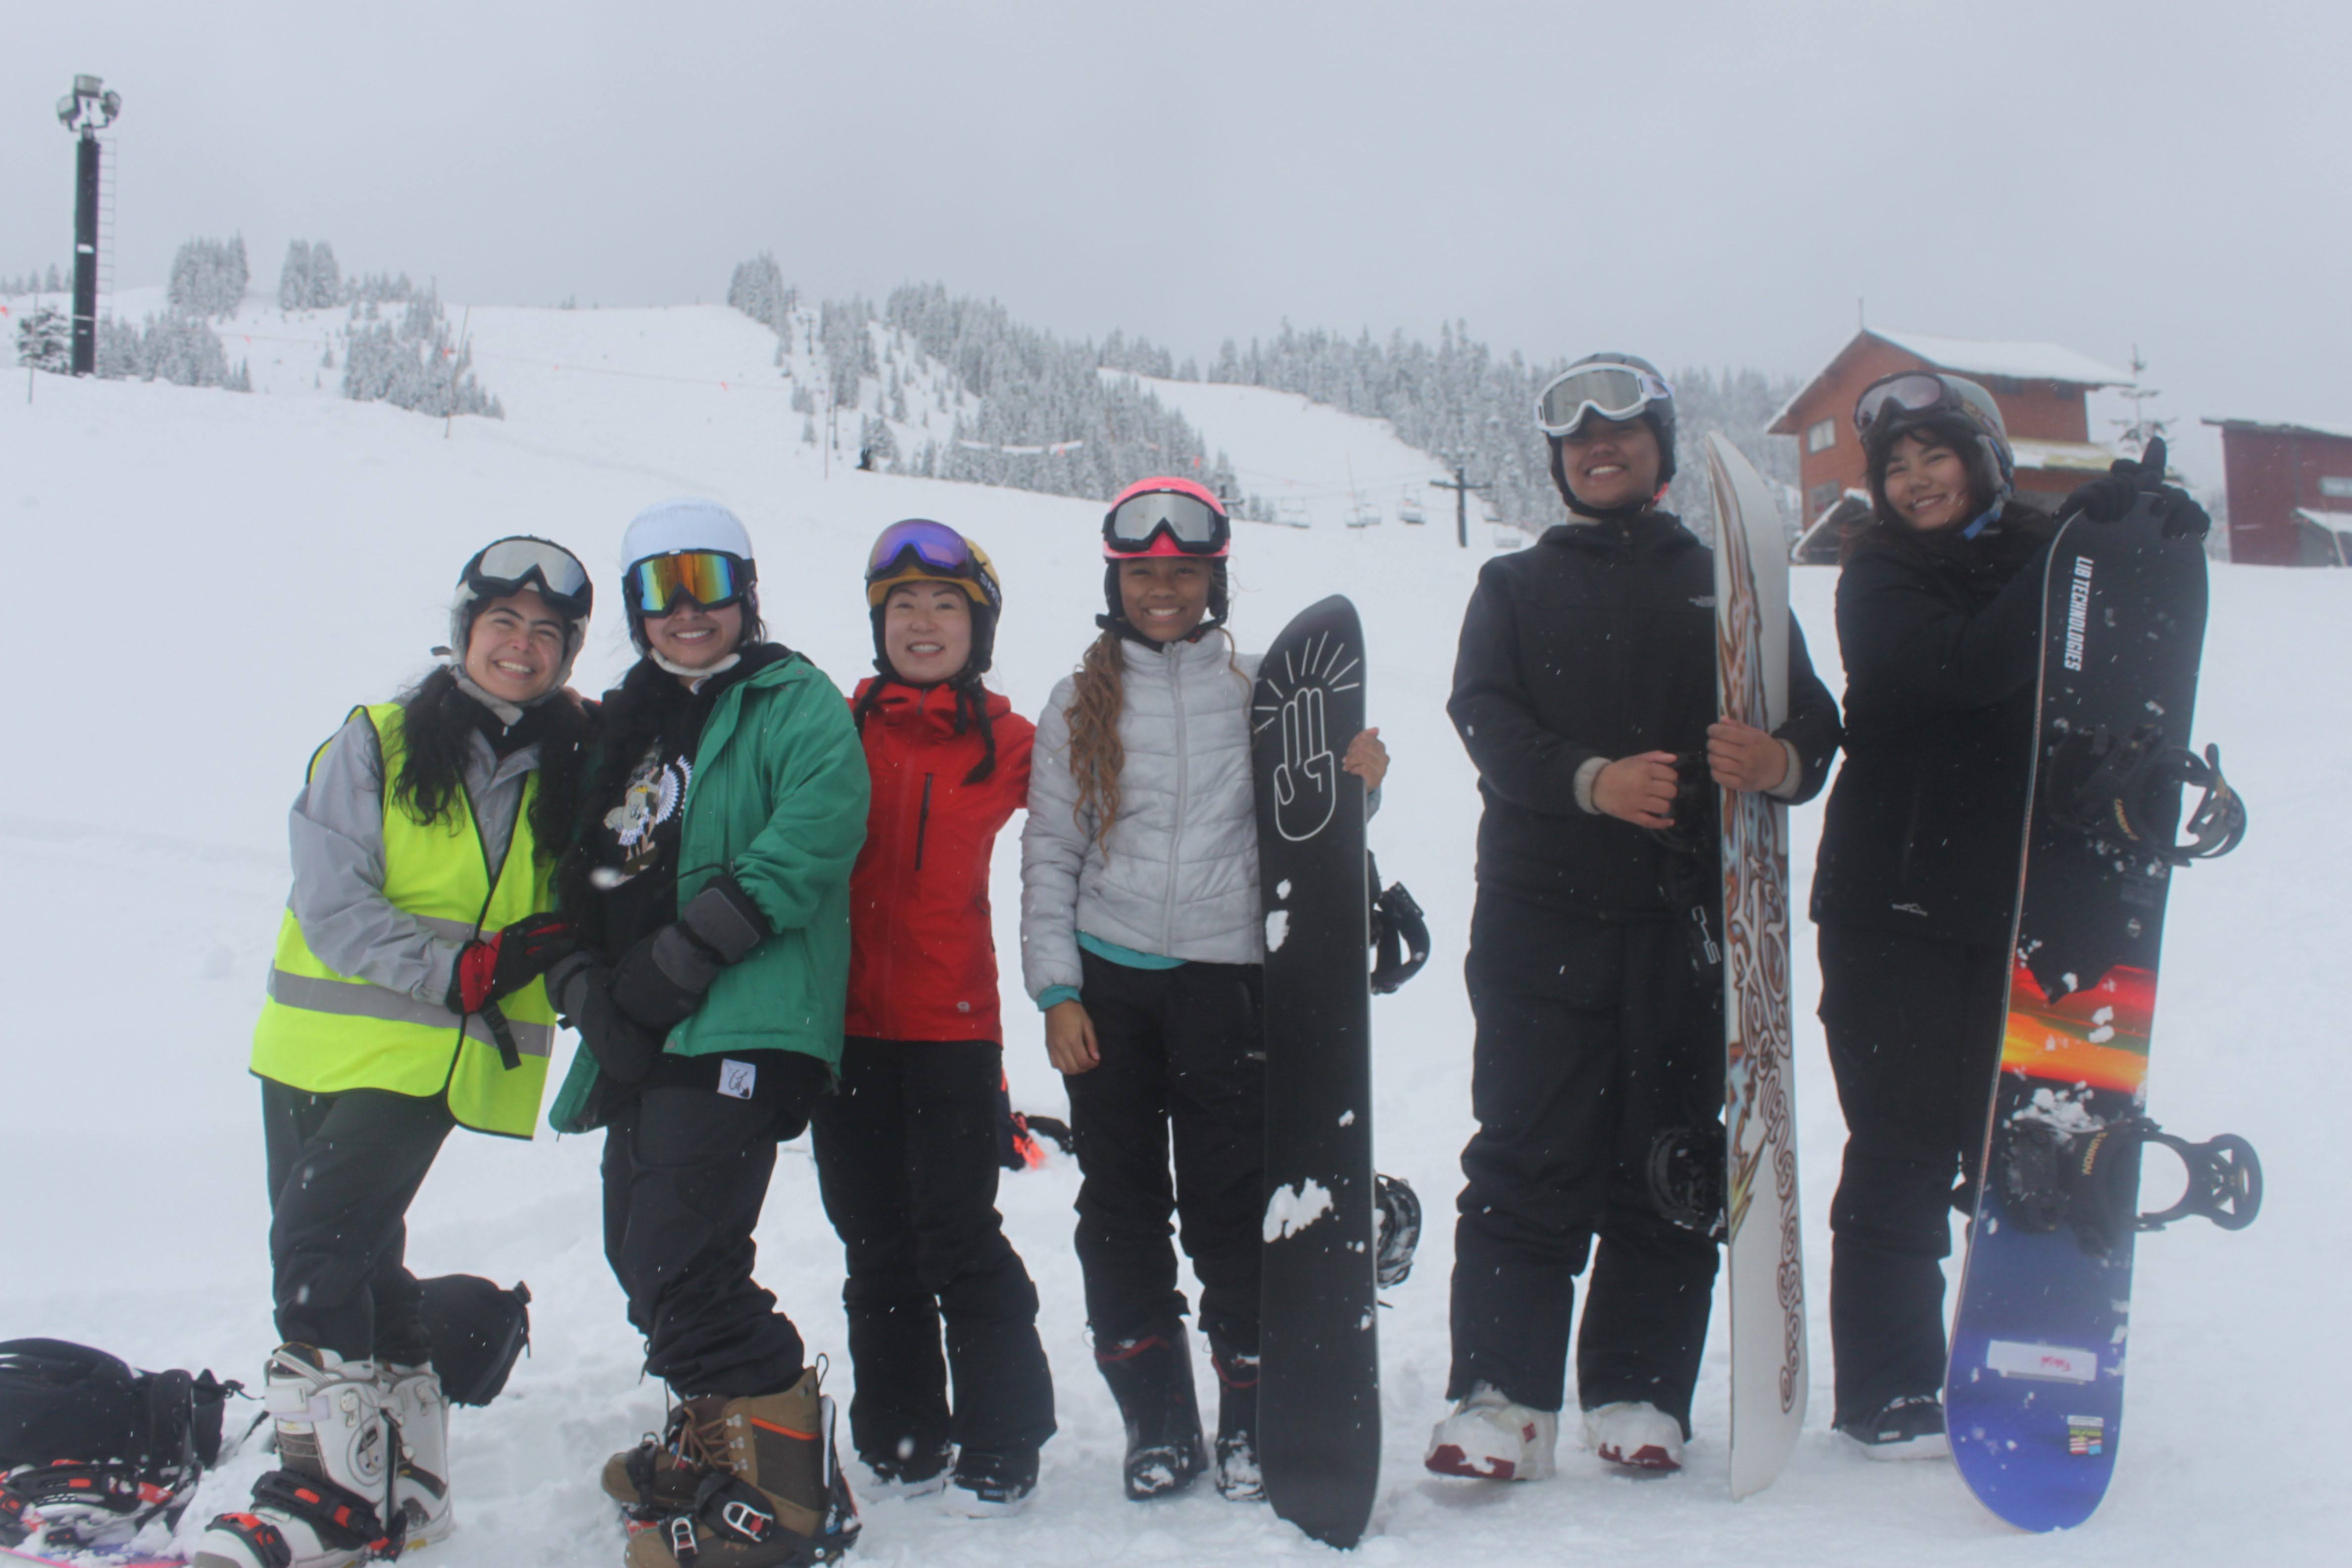 Elders and youth snowboard together